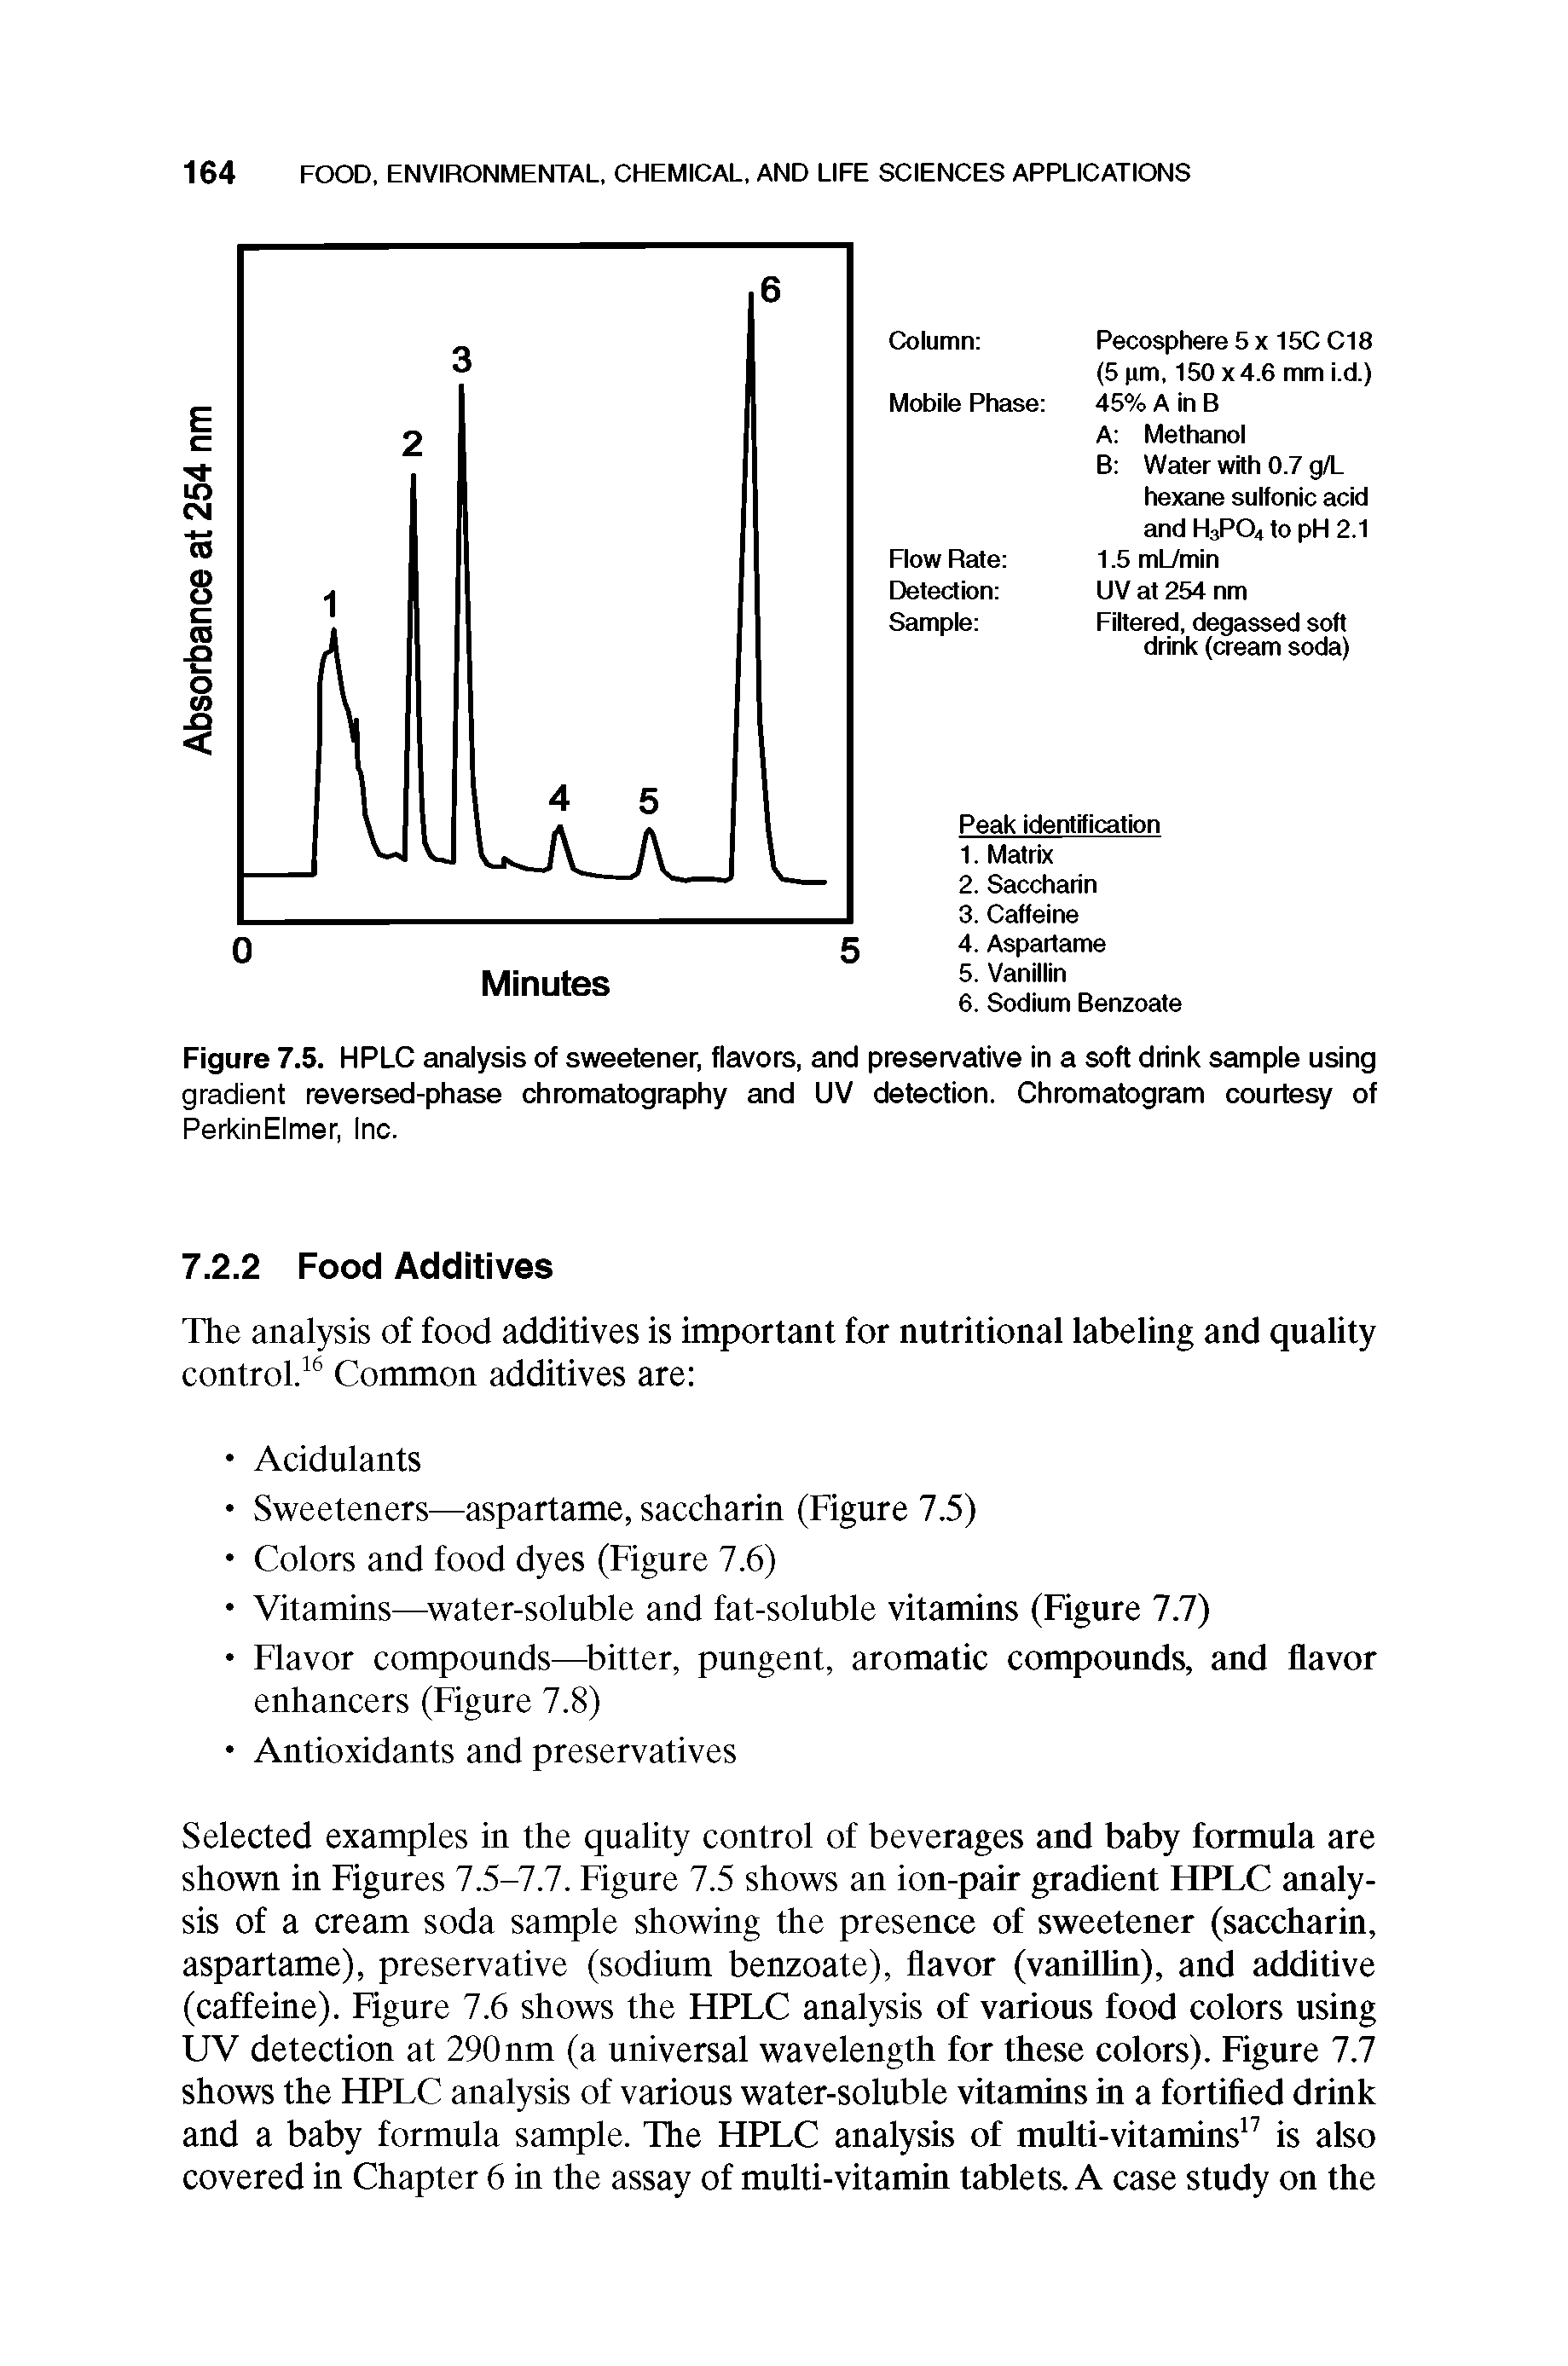 Figure 7.5. HPLC analysis of sweetener, flavors, and preservative in a soft drink sample using gradient reversed-phase chromatography and UV detection. Chromatogram courtesy of PerkinElmer, Inc.